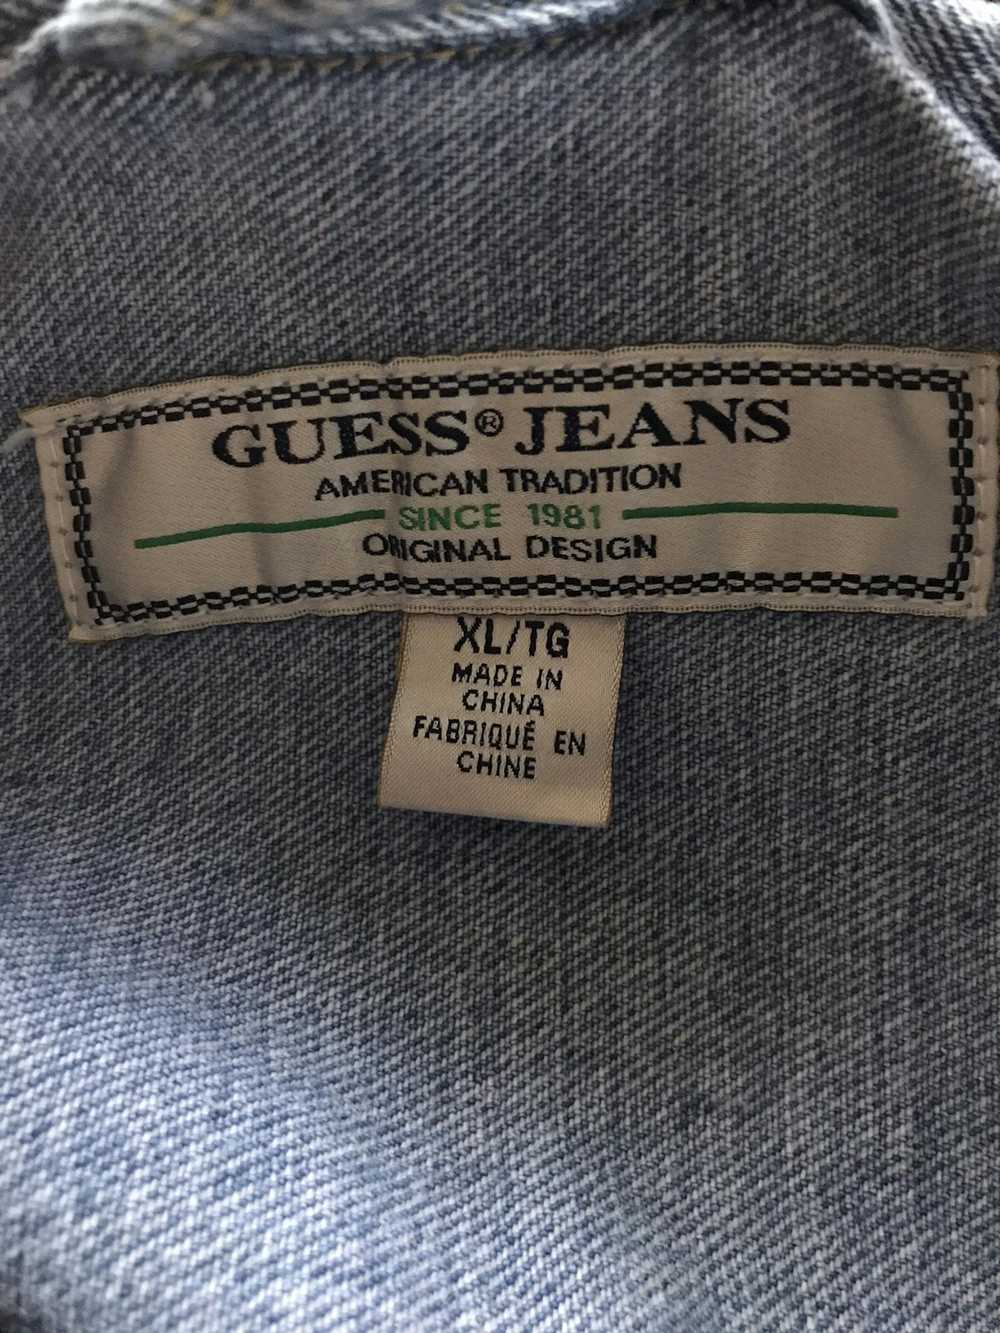 Guess Guess Jeans Jacket - image 3